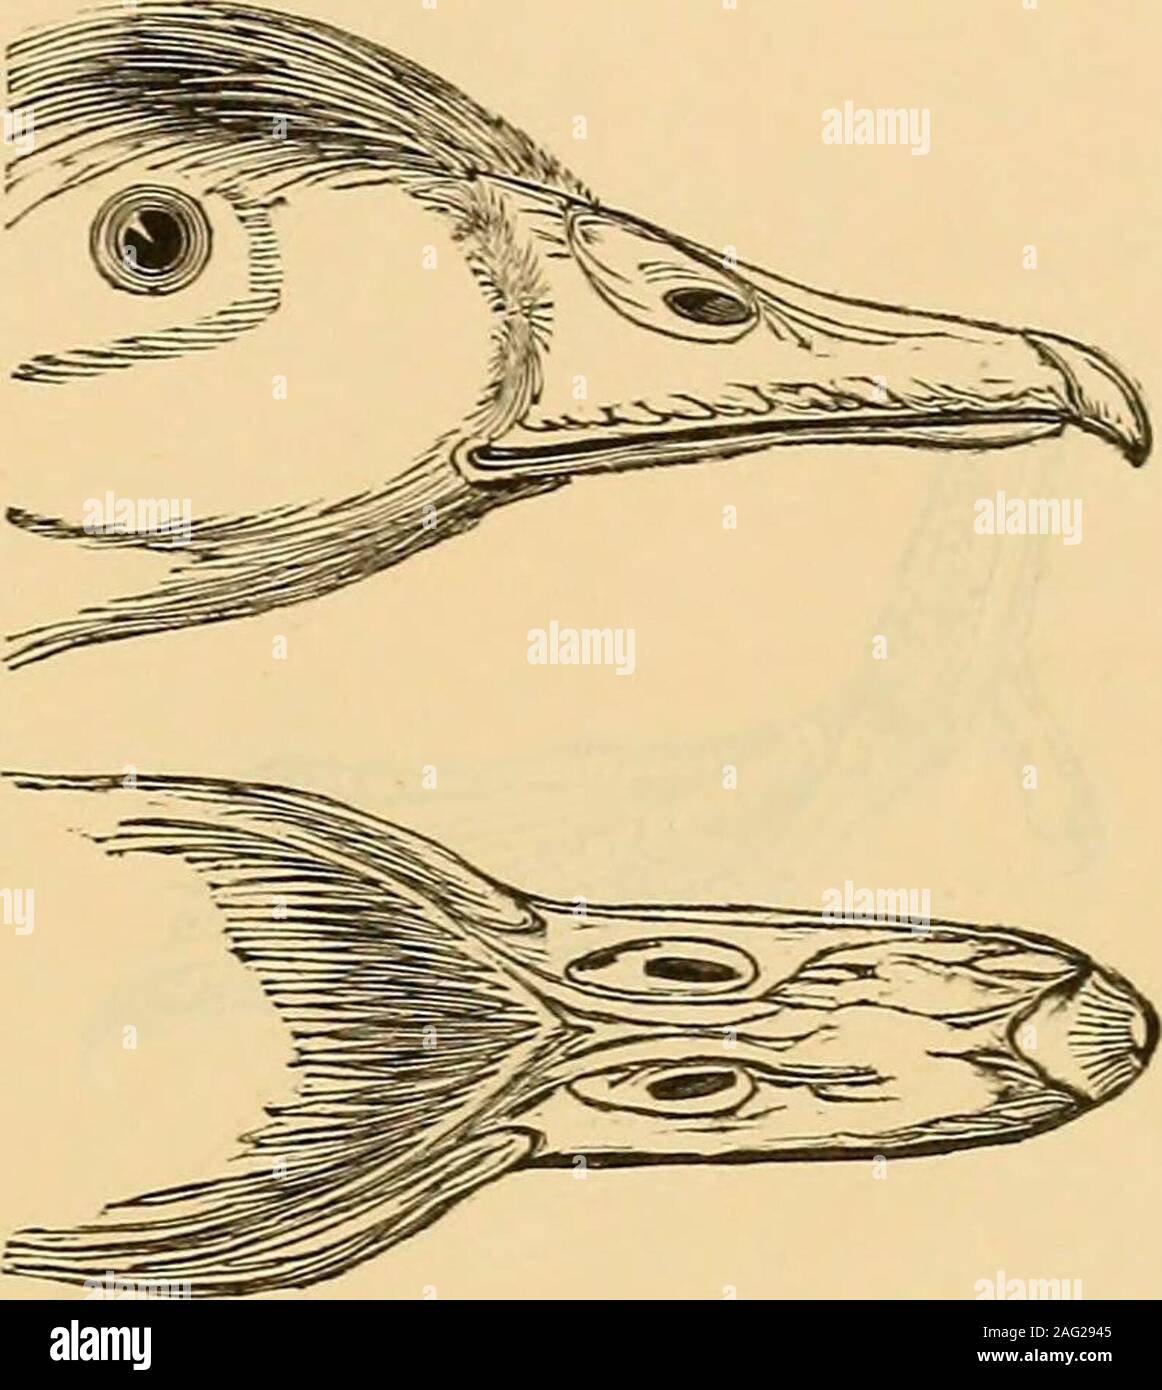 . A monograph on the anatidae, or duck tribe. 35 [ AXATIX.L.. GENUS VIII. AIA. Ext. Char. Pedes digitis posterioribus non lobatis, means lougissimis. Tibia plumatae.Rostrum brevius capite, baso ad apicem angustatum. Lamella abbreviatae. Nares subovales, parvae.(mala mediocris. Anat. Char. Trachea tubula equali. Larynx inferior bulbosa, ossea, similis pre-cedent!. Ext. Char. Feet Avith tbe posterior toes not lobated, the middle ones longest. Thighsfeathered. Bill shorter than the head, narrowed from the base to the point. Lamella abbreviatedNostrils suboval, small. Tail moderate. Axat. Char. Tr Stock Photo